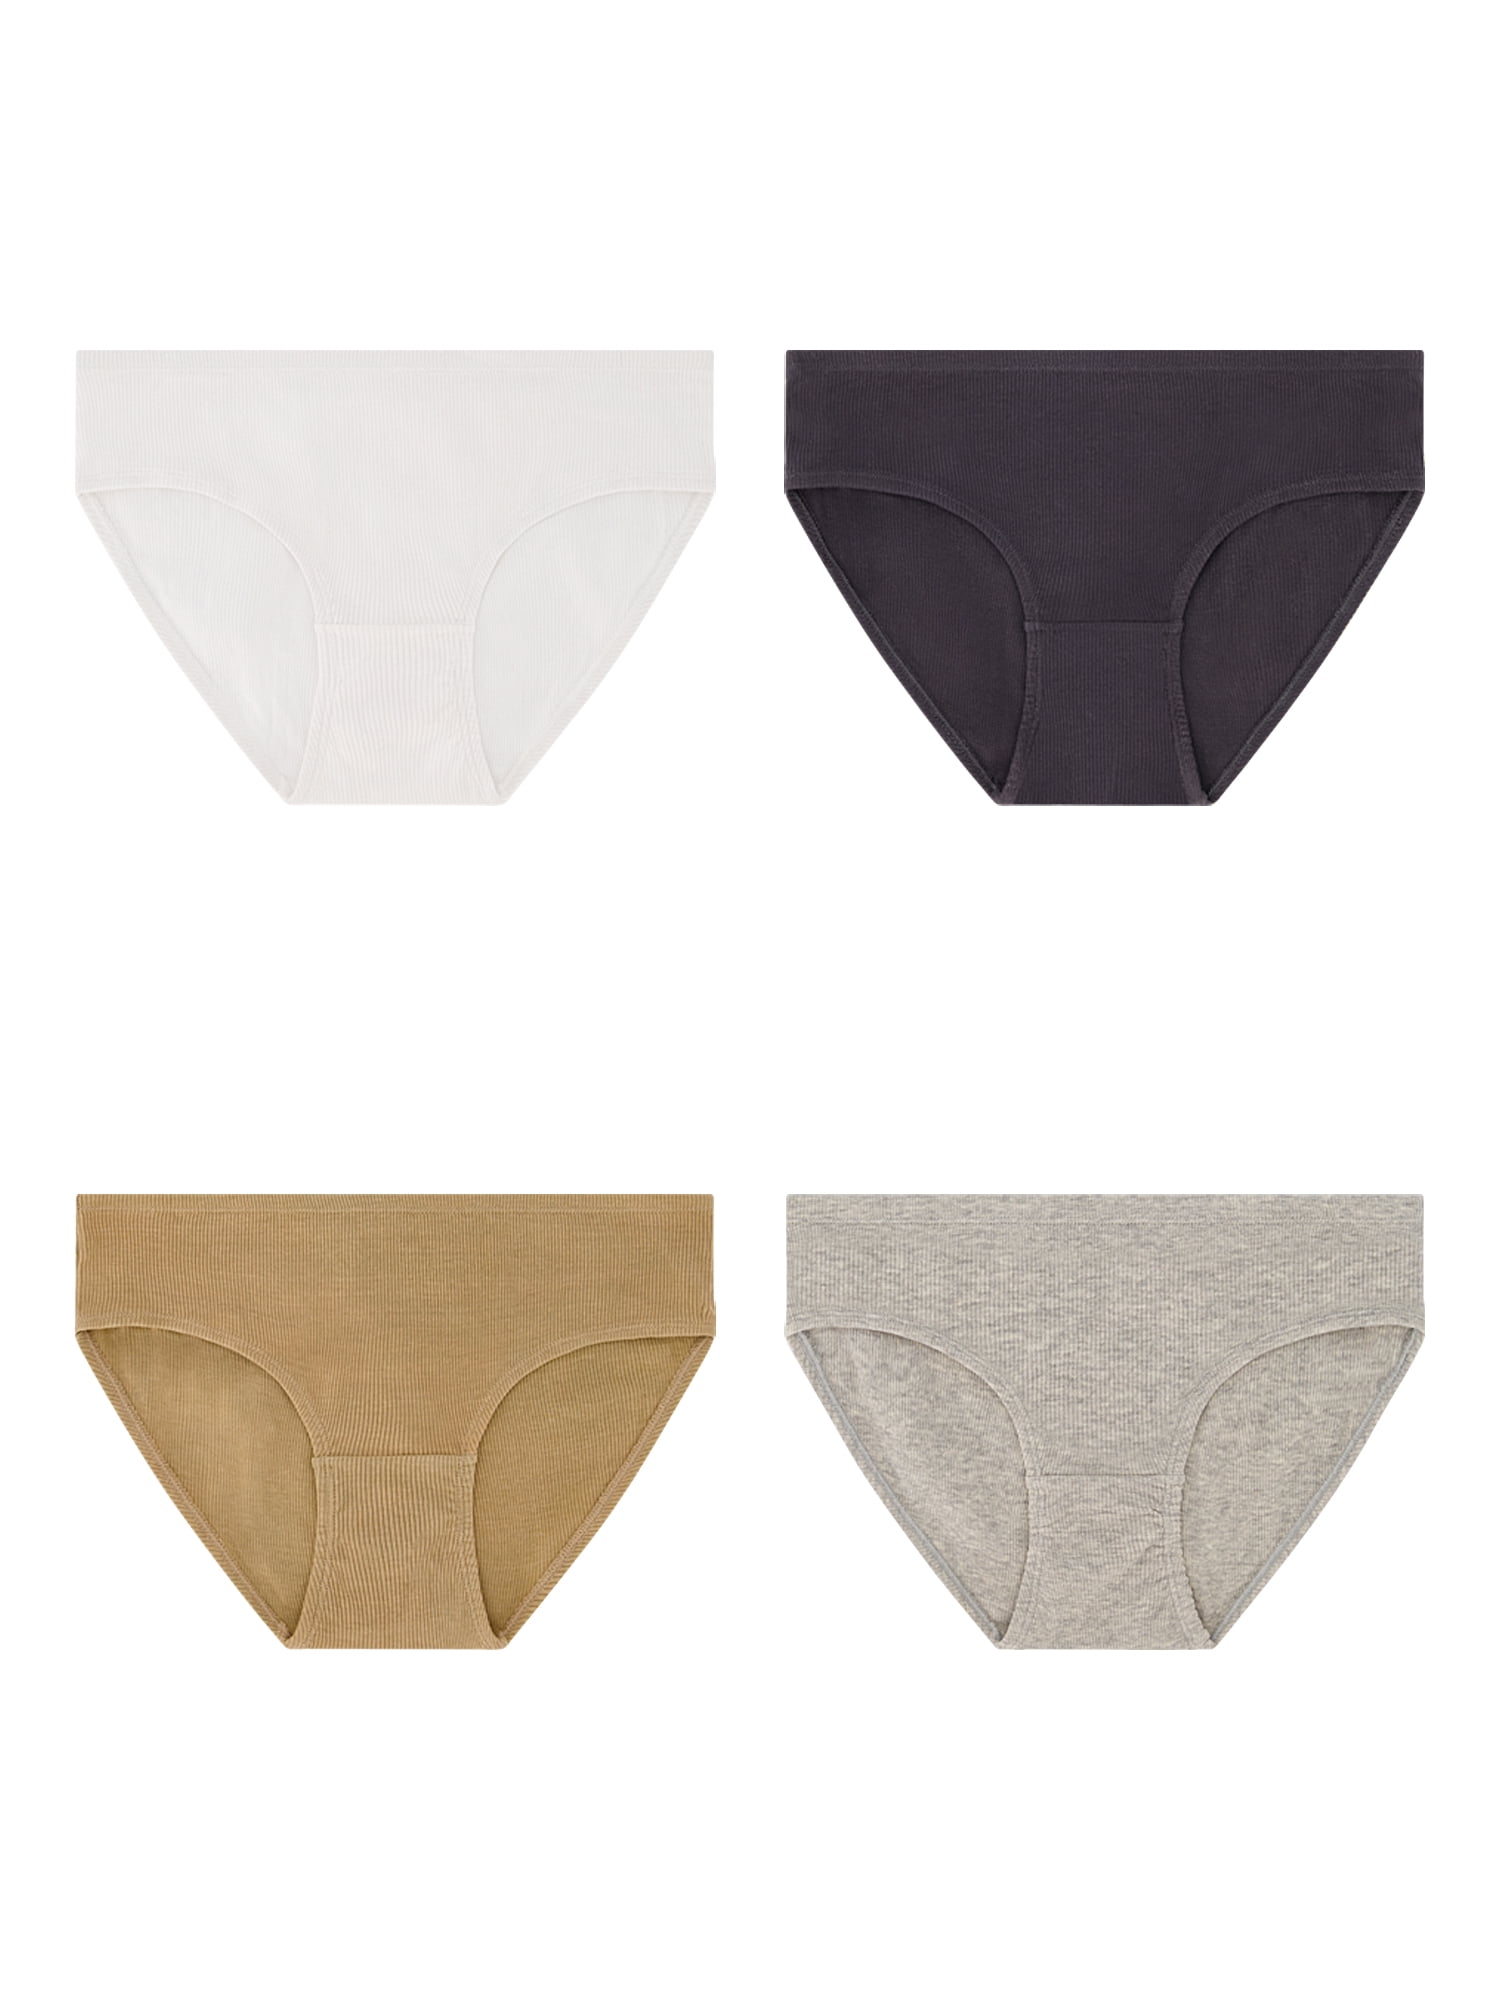 Best Fitting Panty Women's Cotton Stretch Thong Panties, 4-Pack